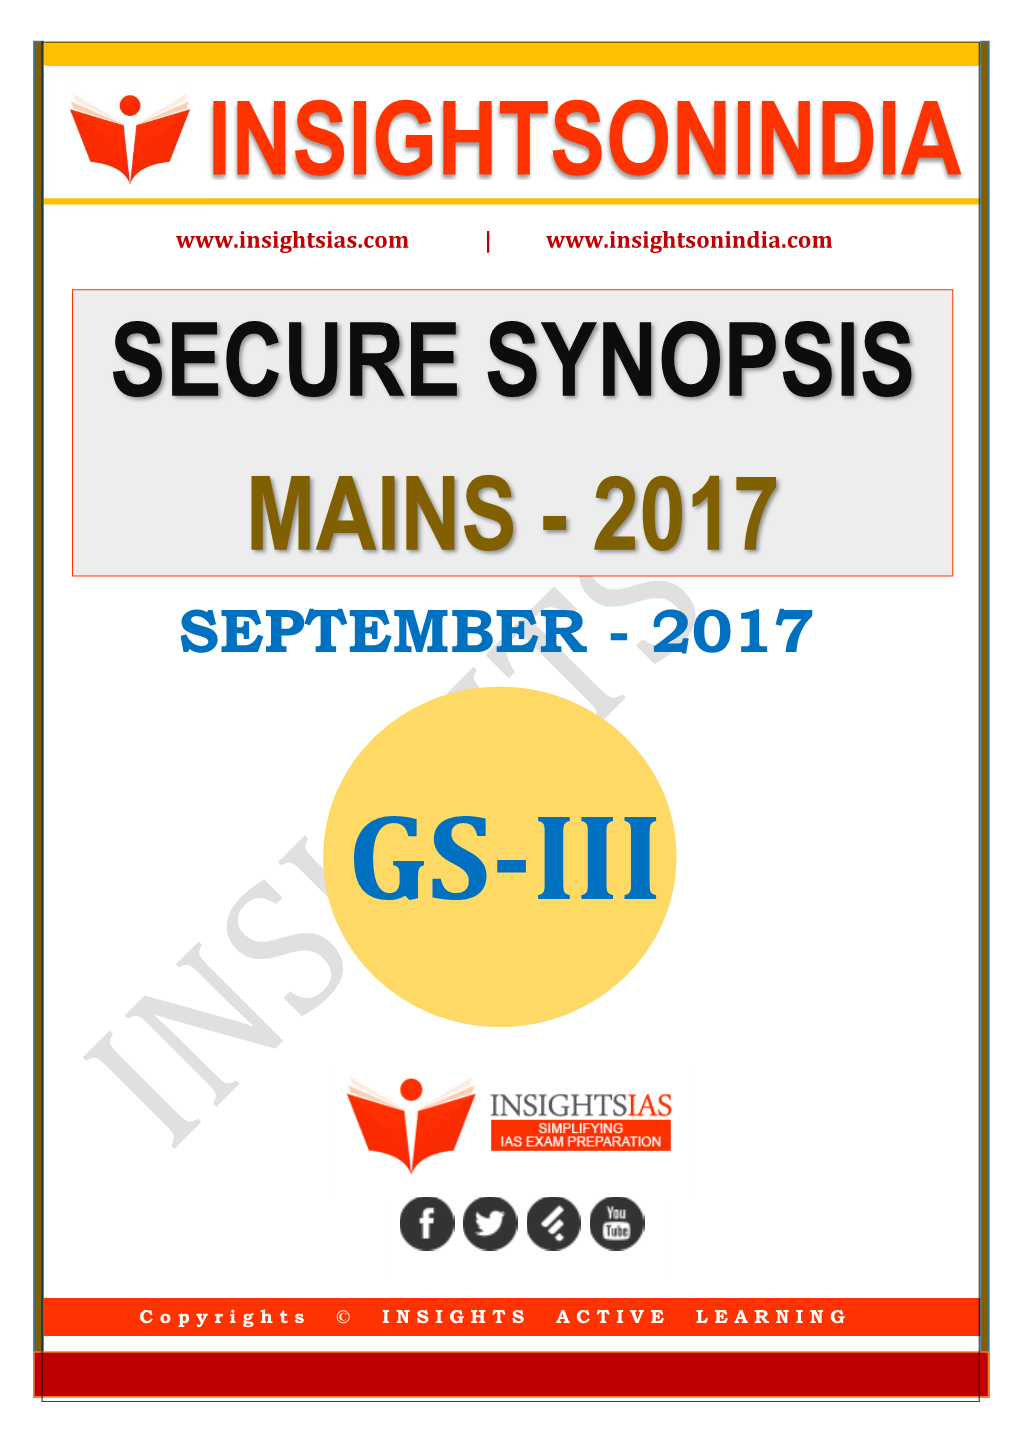 Secure Synopsis Mains - 2017 September - 2017